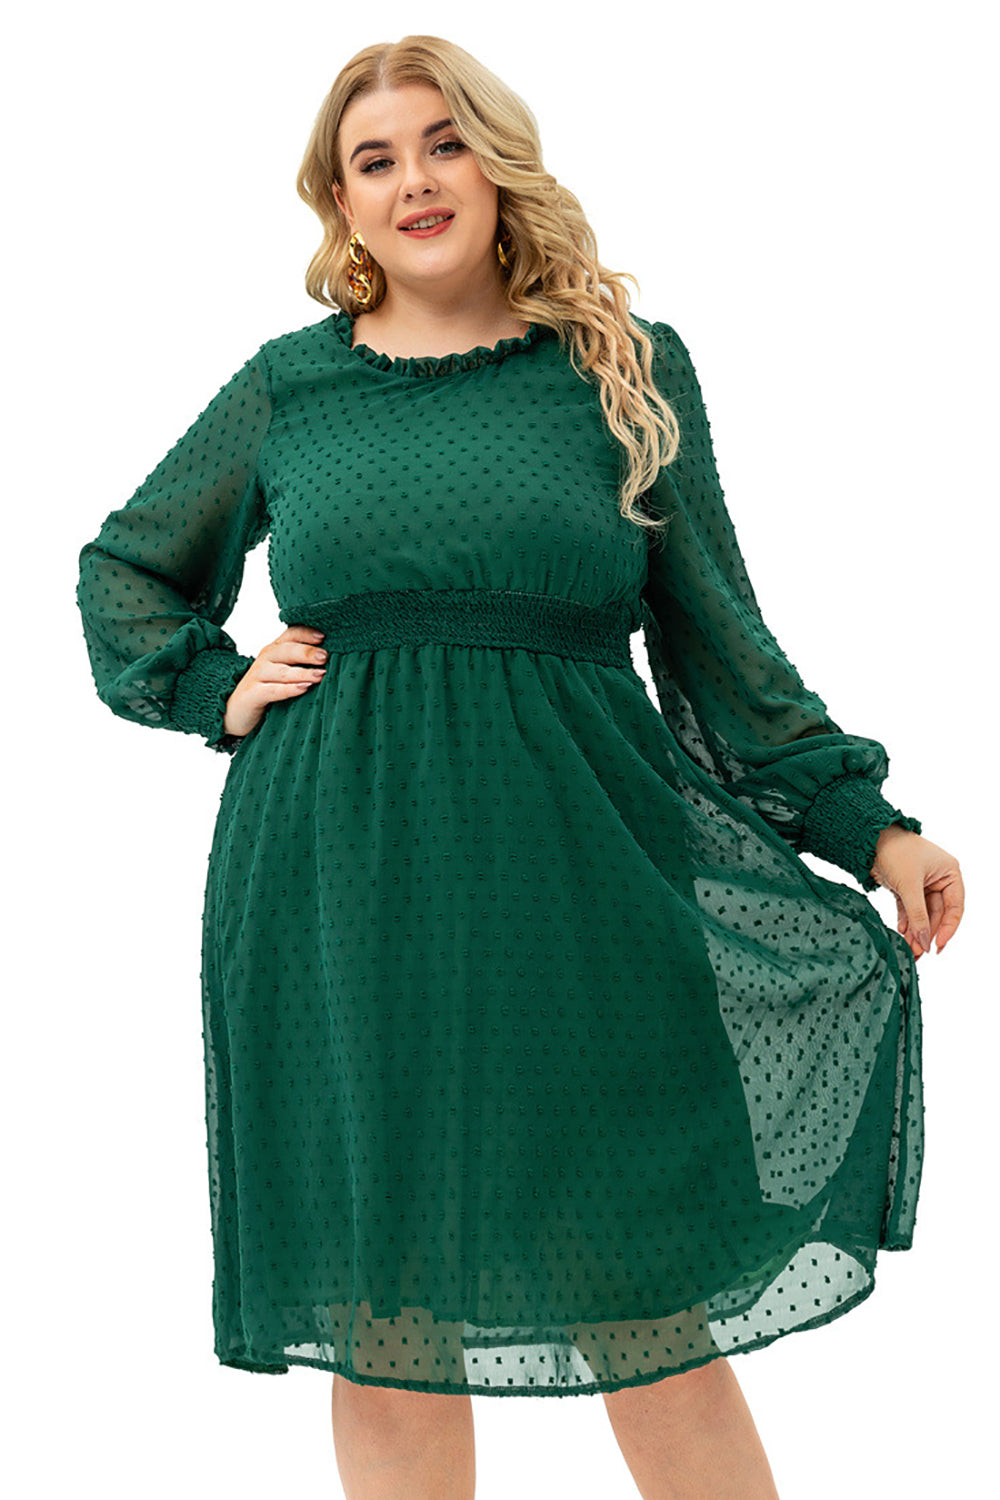 Plus Size Green Casual Dress